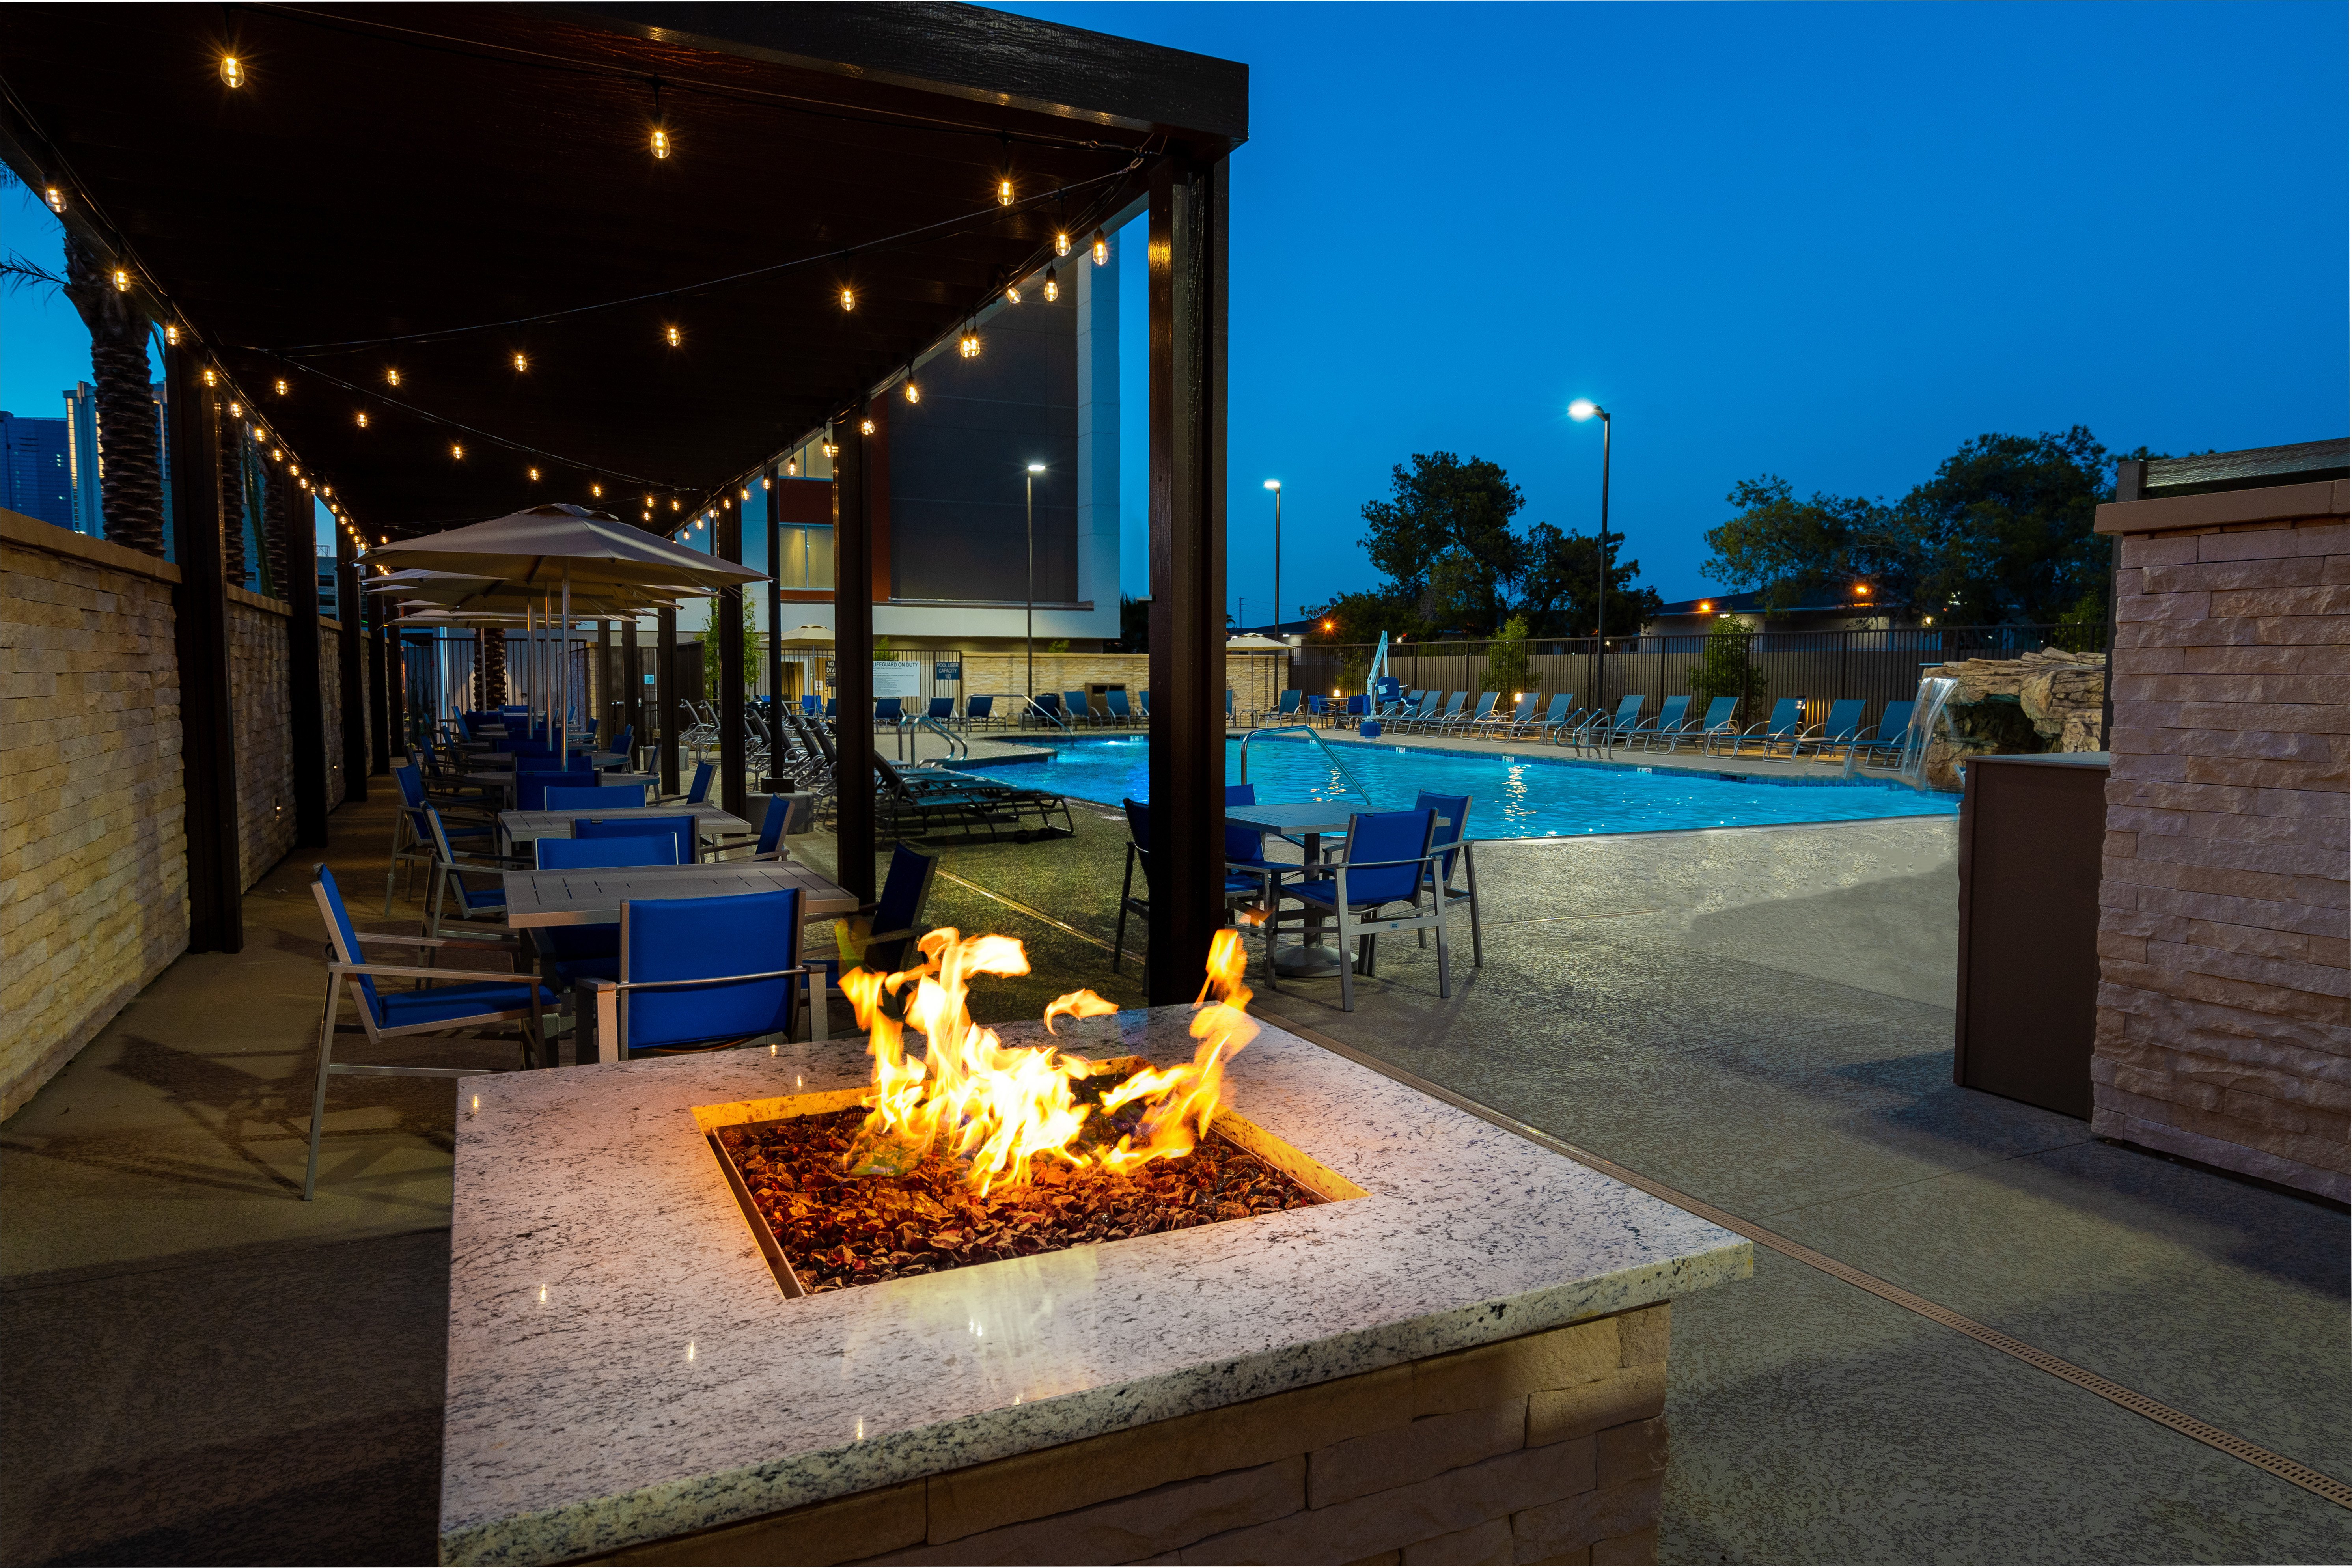 Enjoy a relaxing evening by our fire pit.